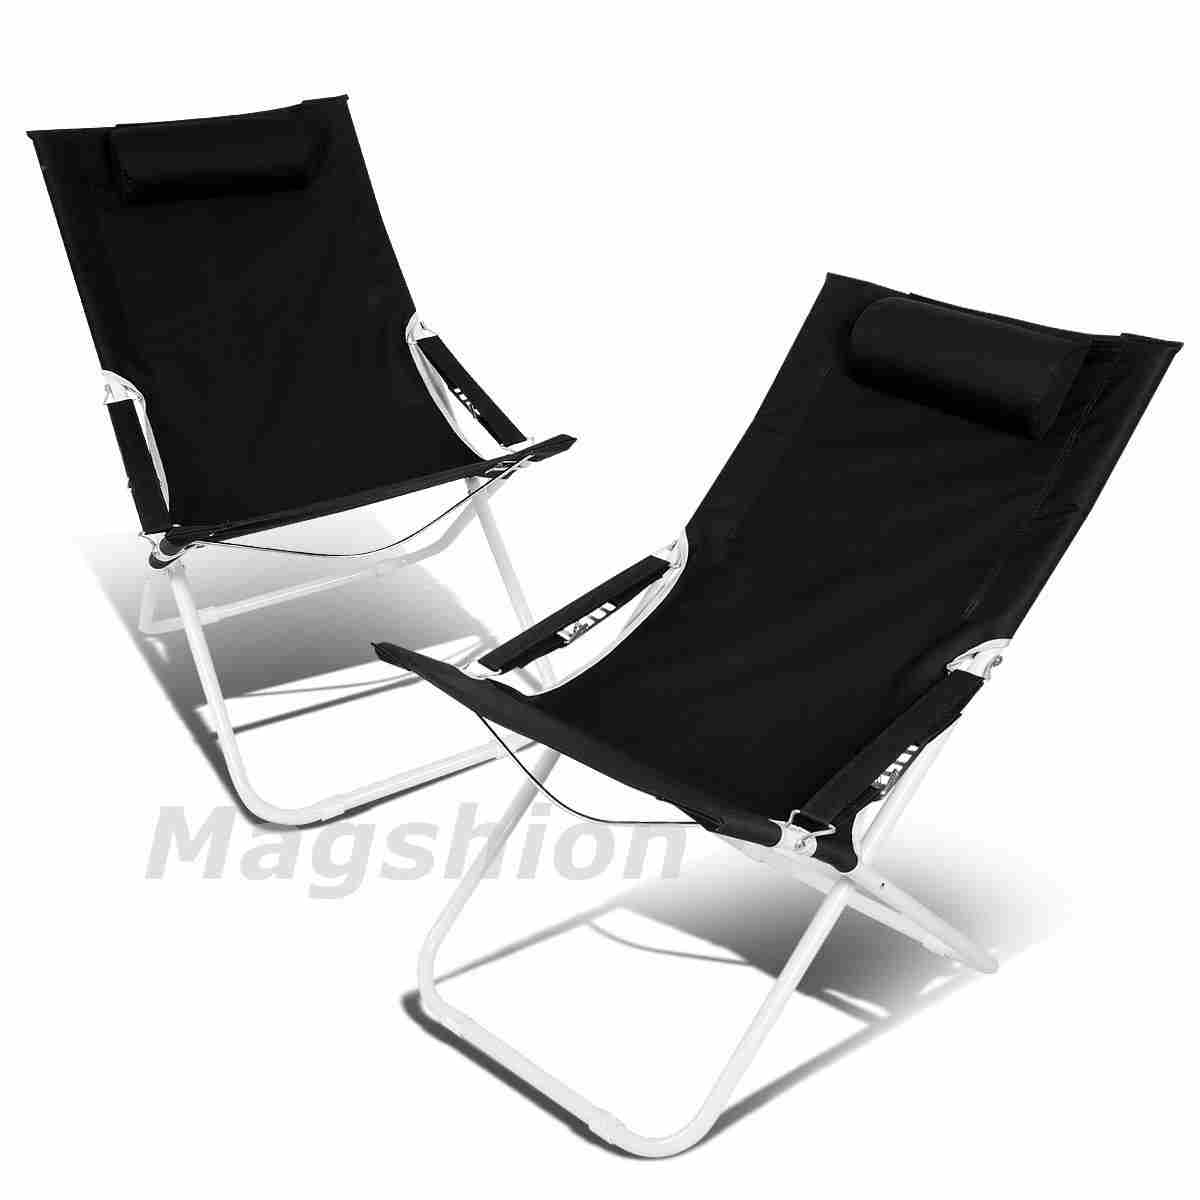 magshion-luxury-camping-chairs